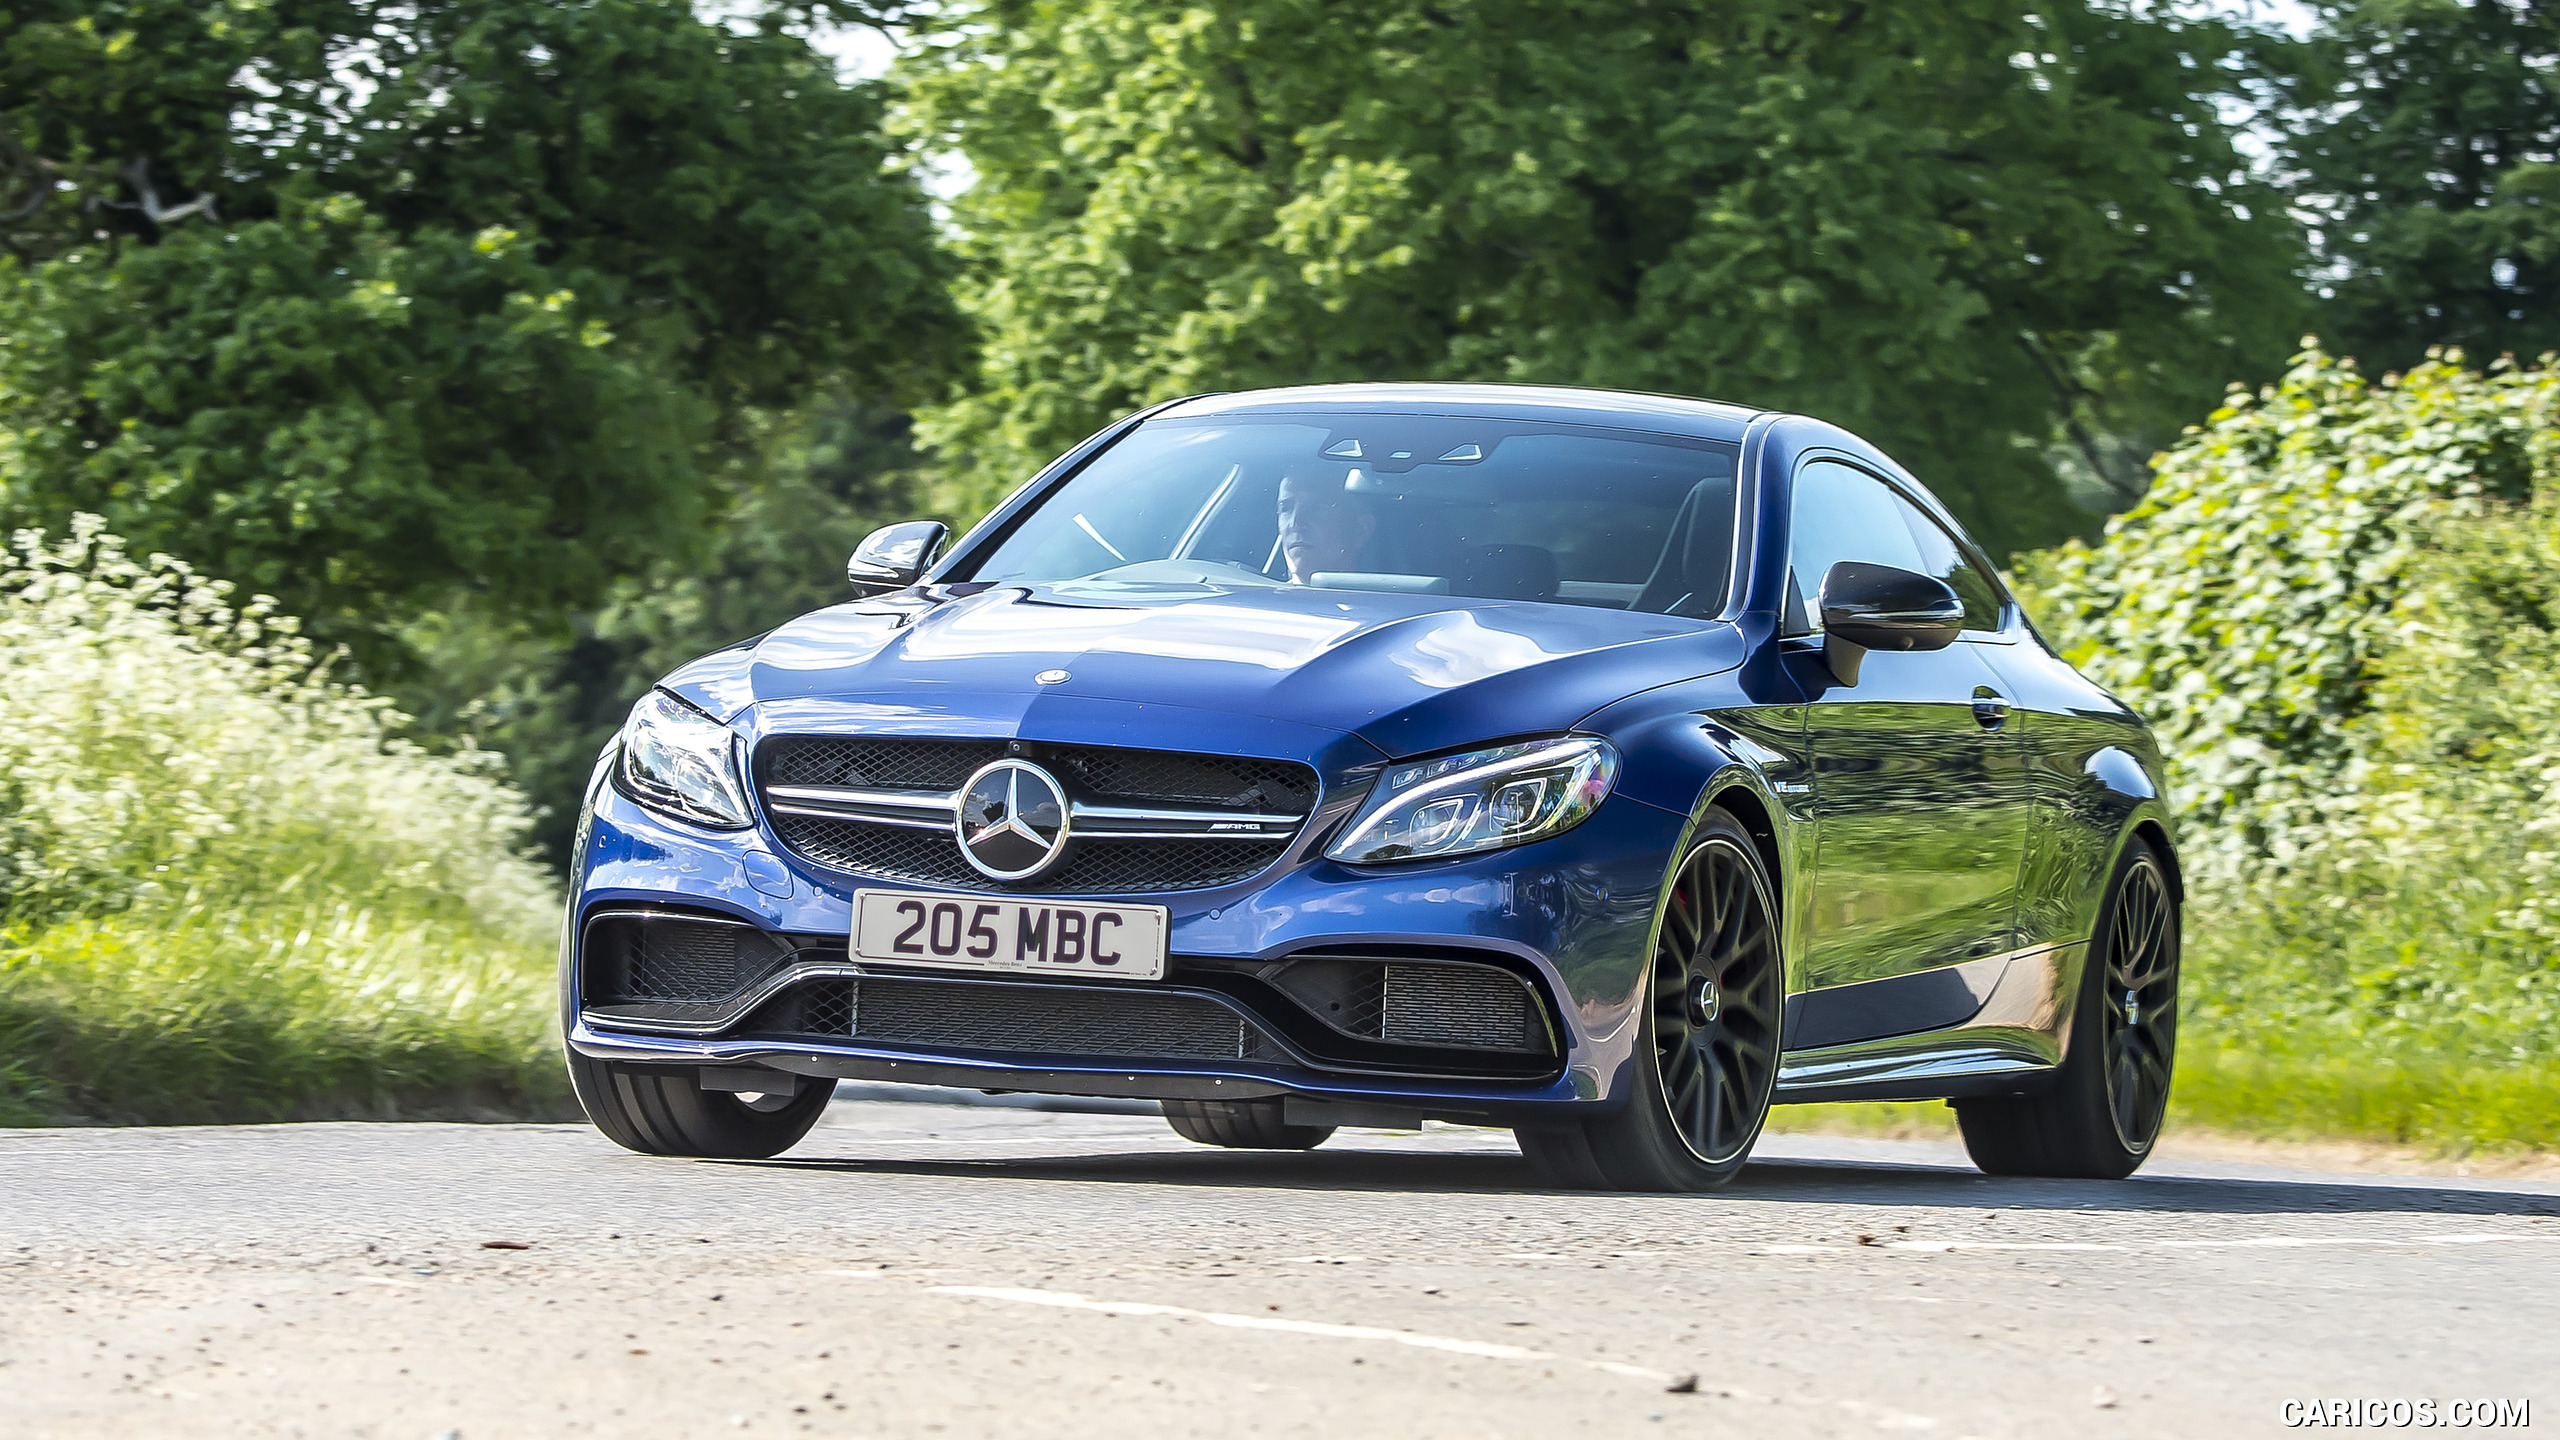 2017 Mercedes-AMG C63 S Coupe (UK-Spec) - Front, #3 of 52